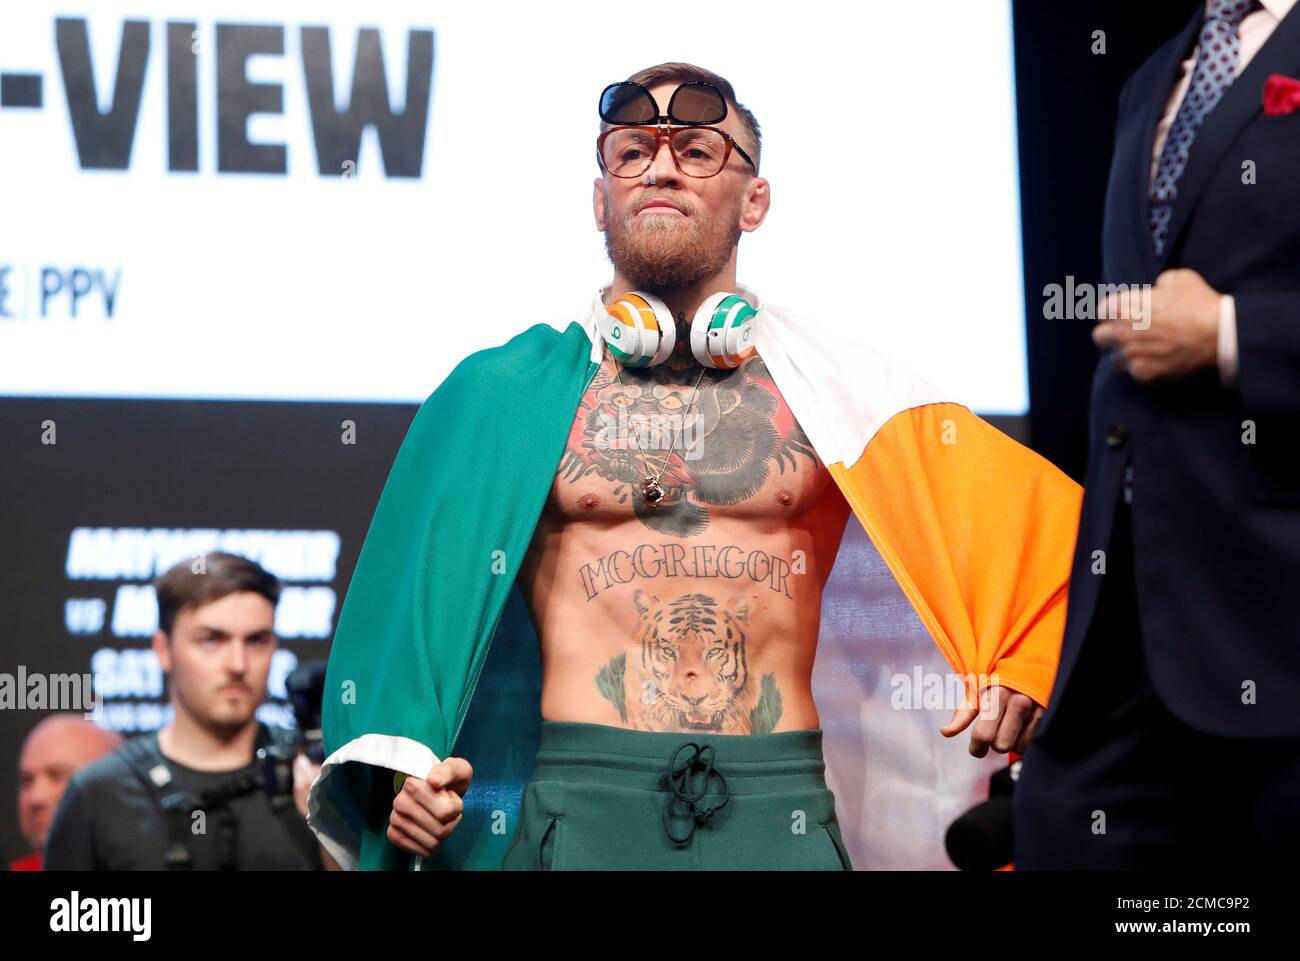 UFC lightweight champion Conor McGregor of Ireland arrives on stage for his  official weigh-in at T-Mobile Arena in Las Vegas, Nevada, U.S. on August  25, 2017. REUTERS/Steve Marcus Stock Photo - Alamy